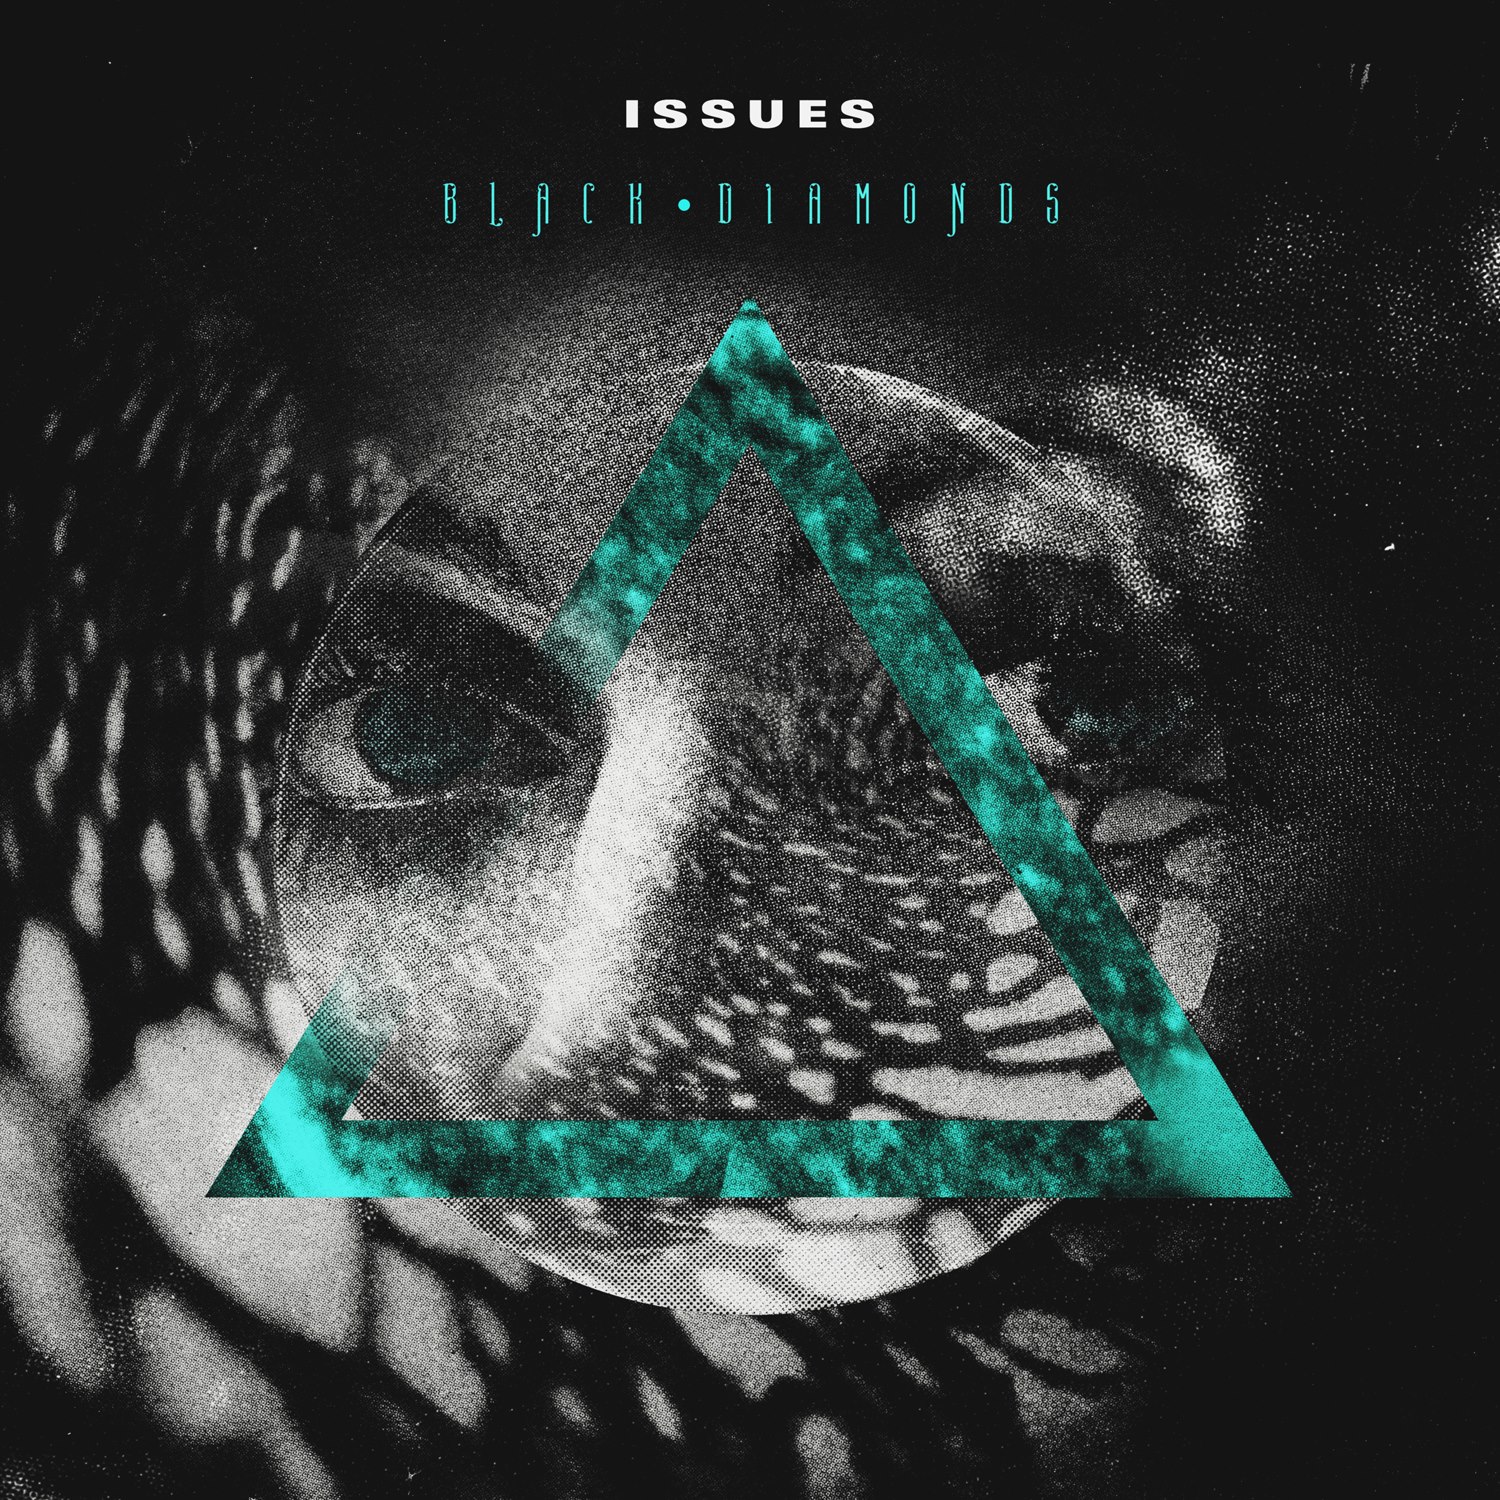 News Added Sep 12, 2012 Tyler Carter has joined forces with Woe, Is Me members Michael Bohn, Ben Ferris, Cory Ferris, and Case Snedecor, in a new band called ISSUES. Submitted By Morgan Track list: Added Sep 12, 2012 01. Black Diamonds (ft. Scout) 02. King of Amarillo 03. The Worst of Them 04. Princeton […]